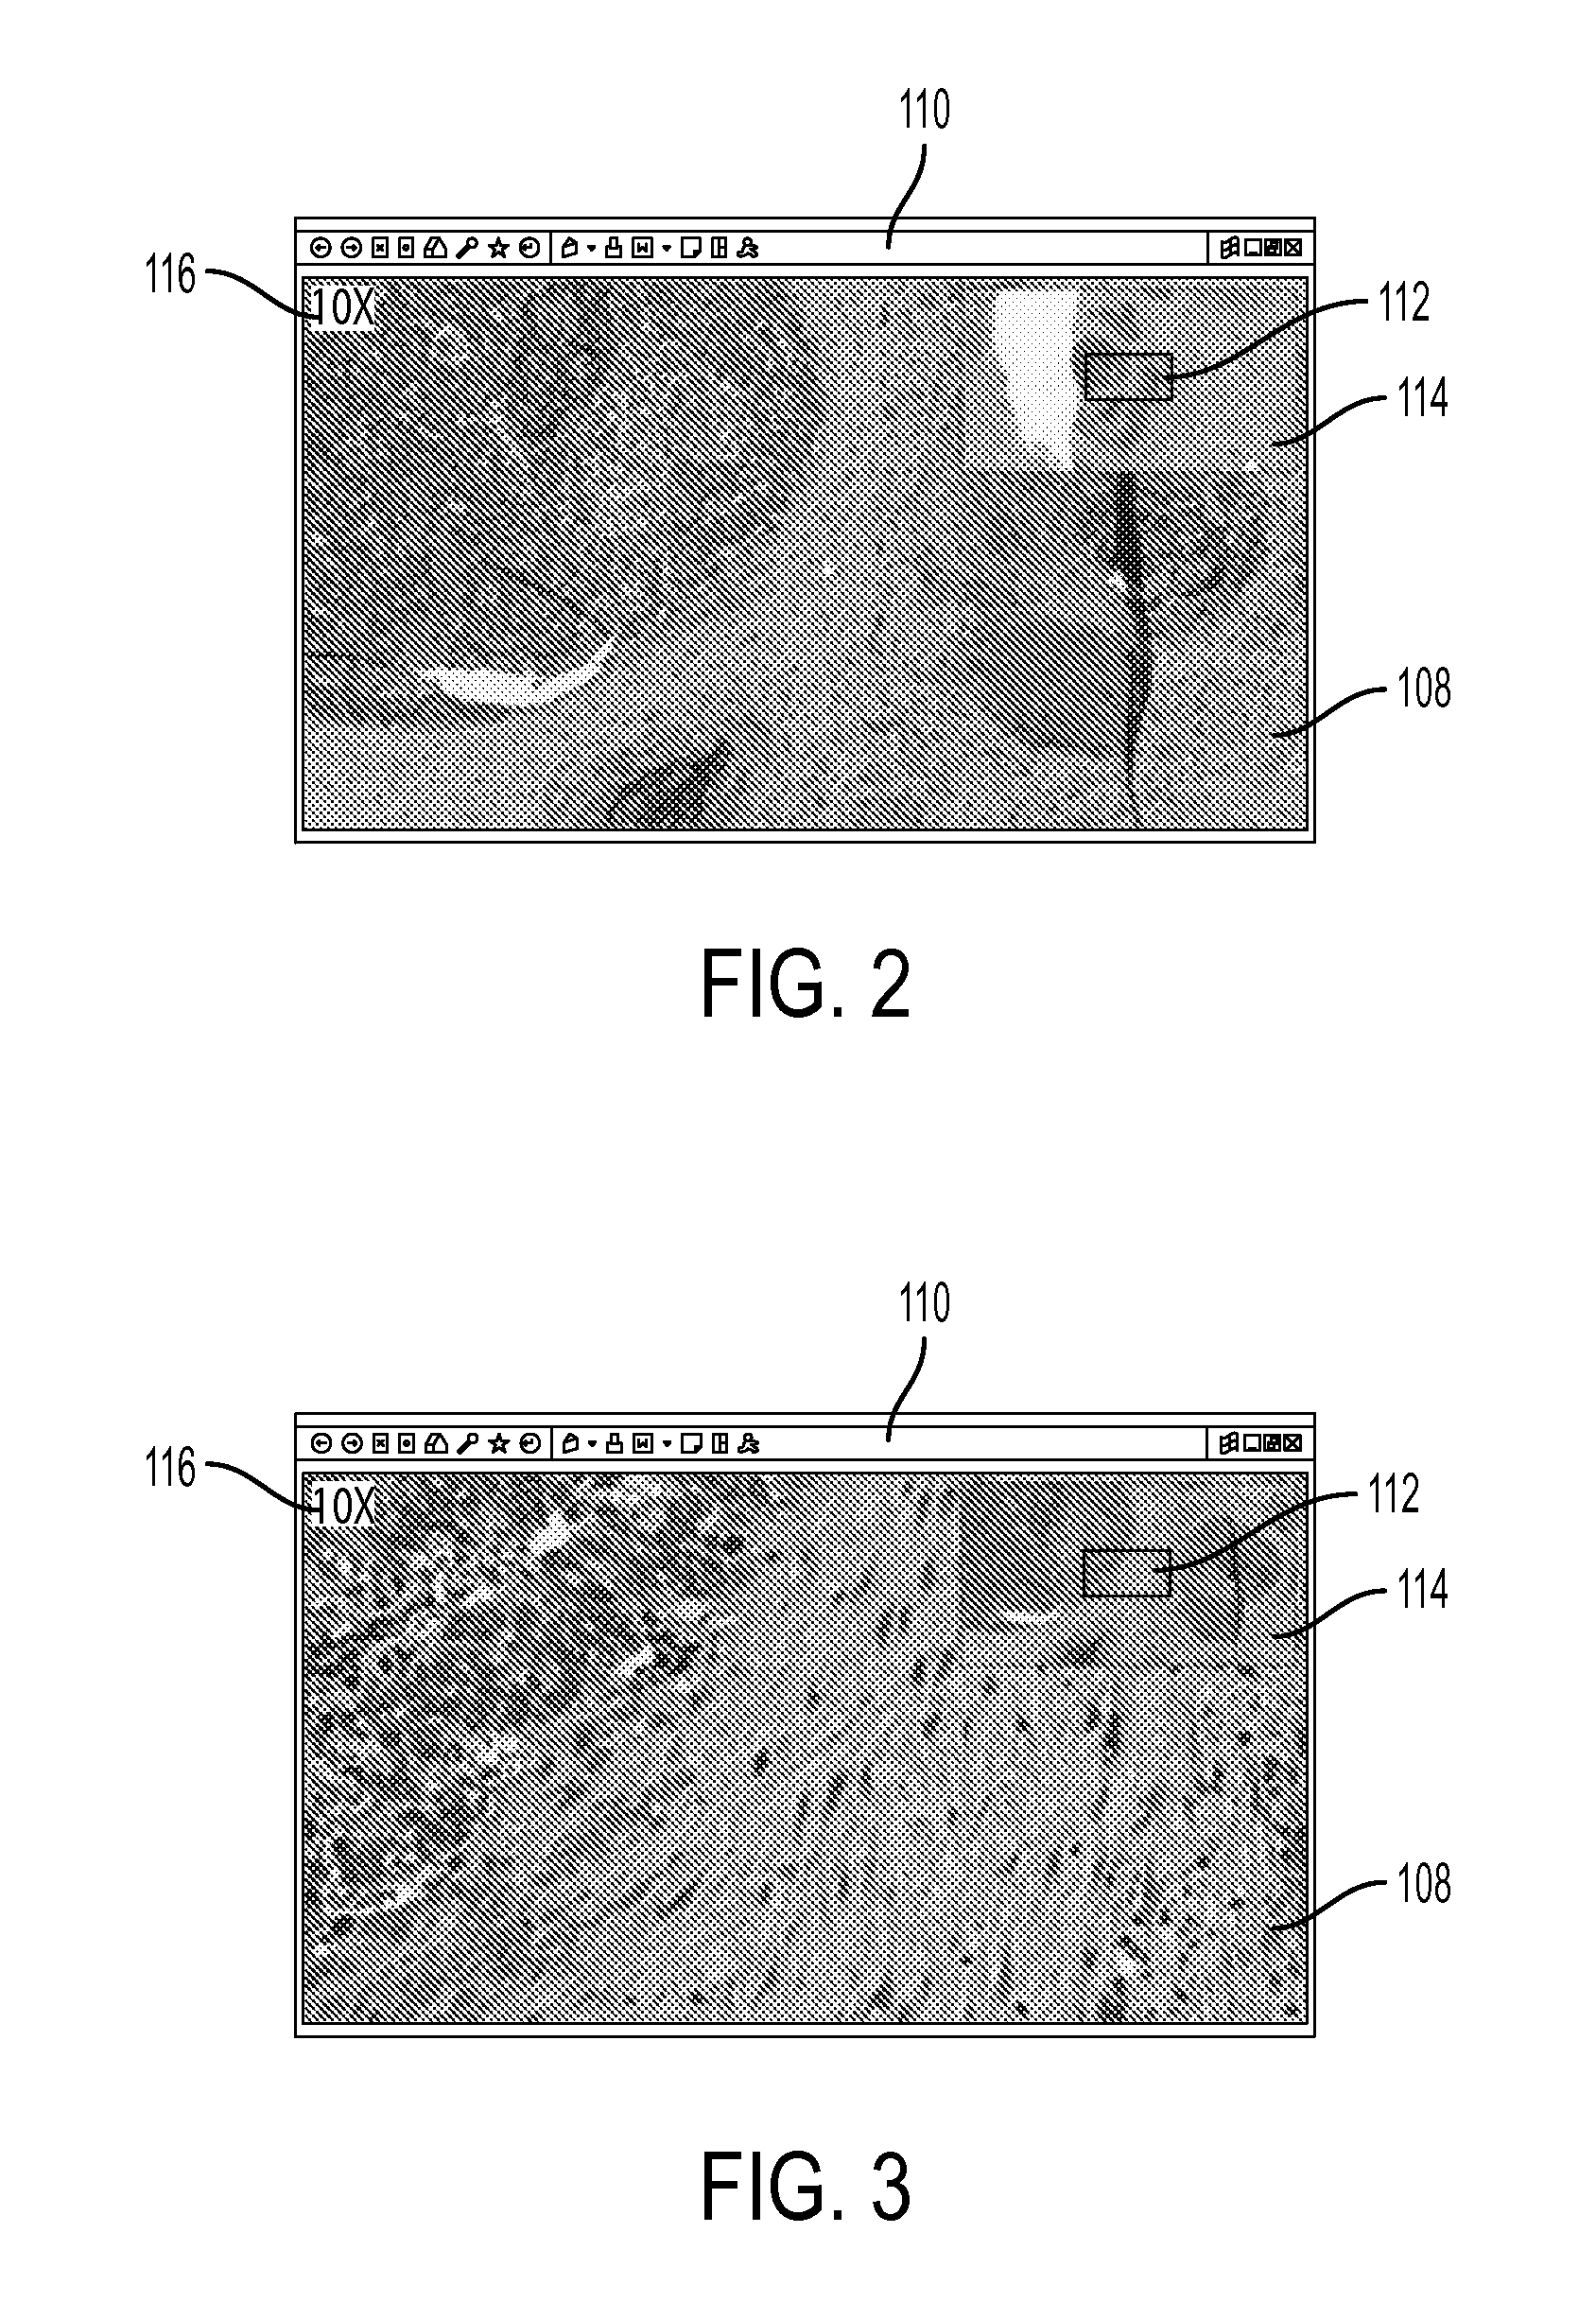 System and method for improved viewing and navigation of digital images